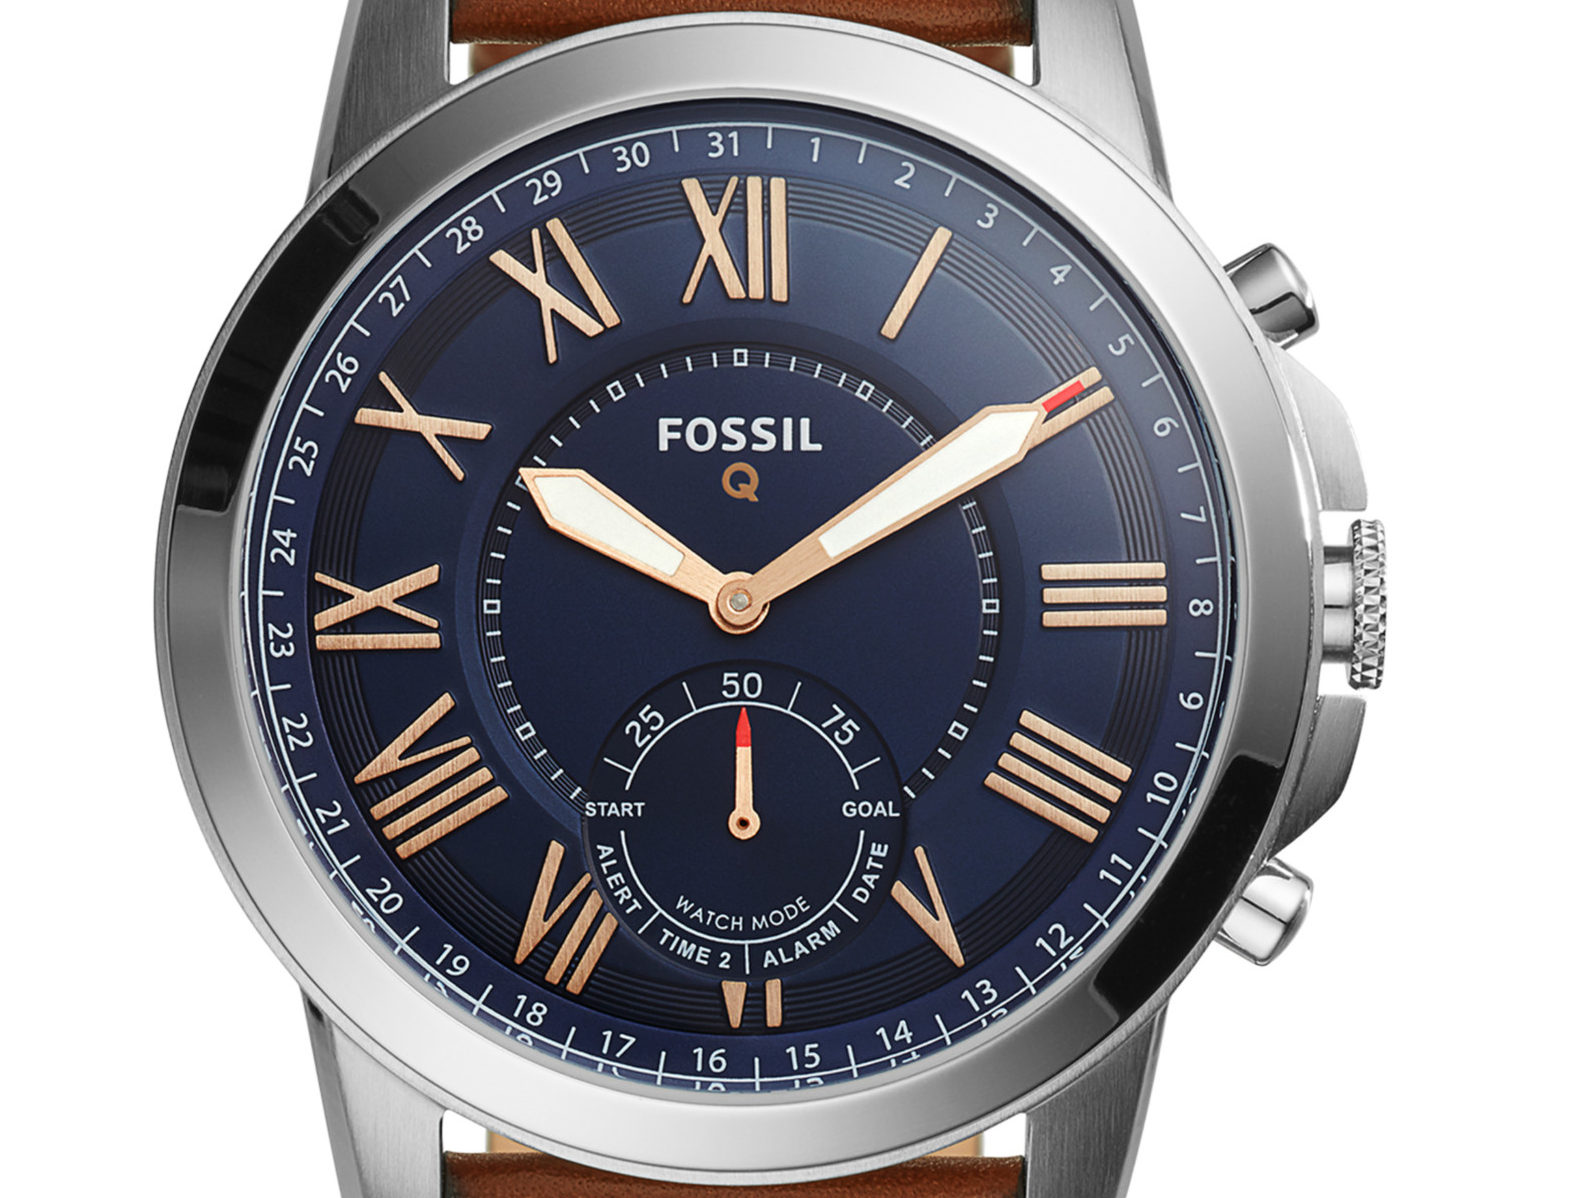 Watches eu. Fossil Group бренды. Fossil brand.